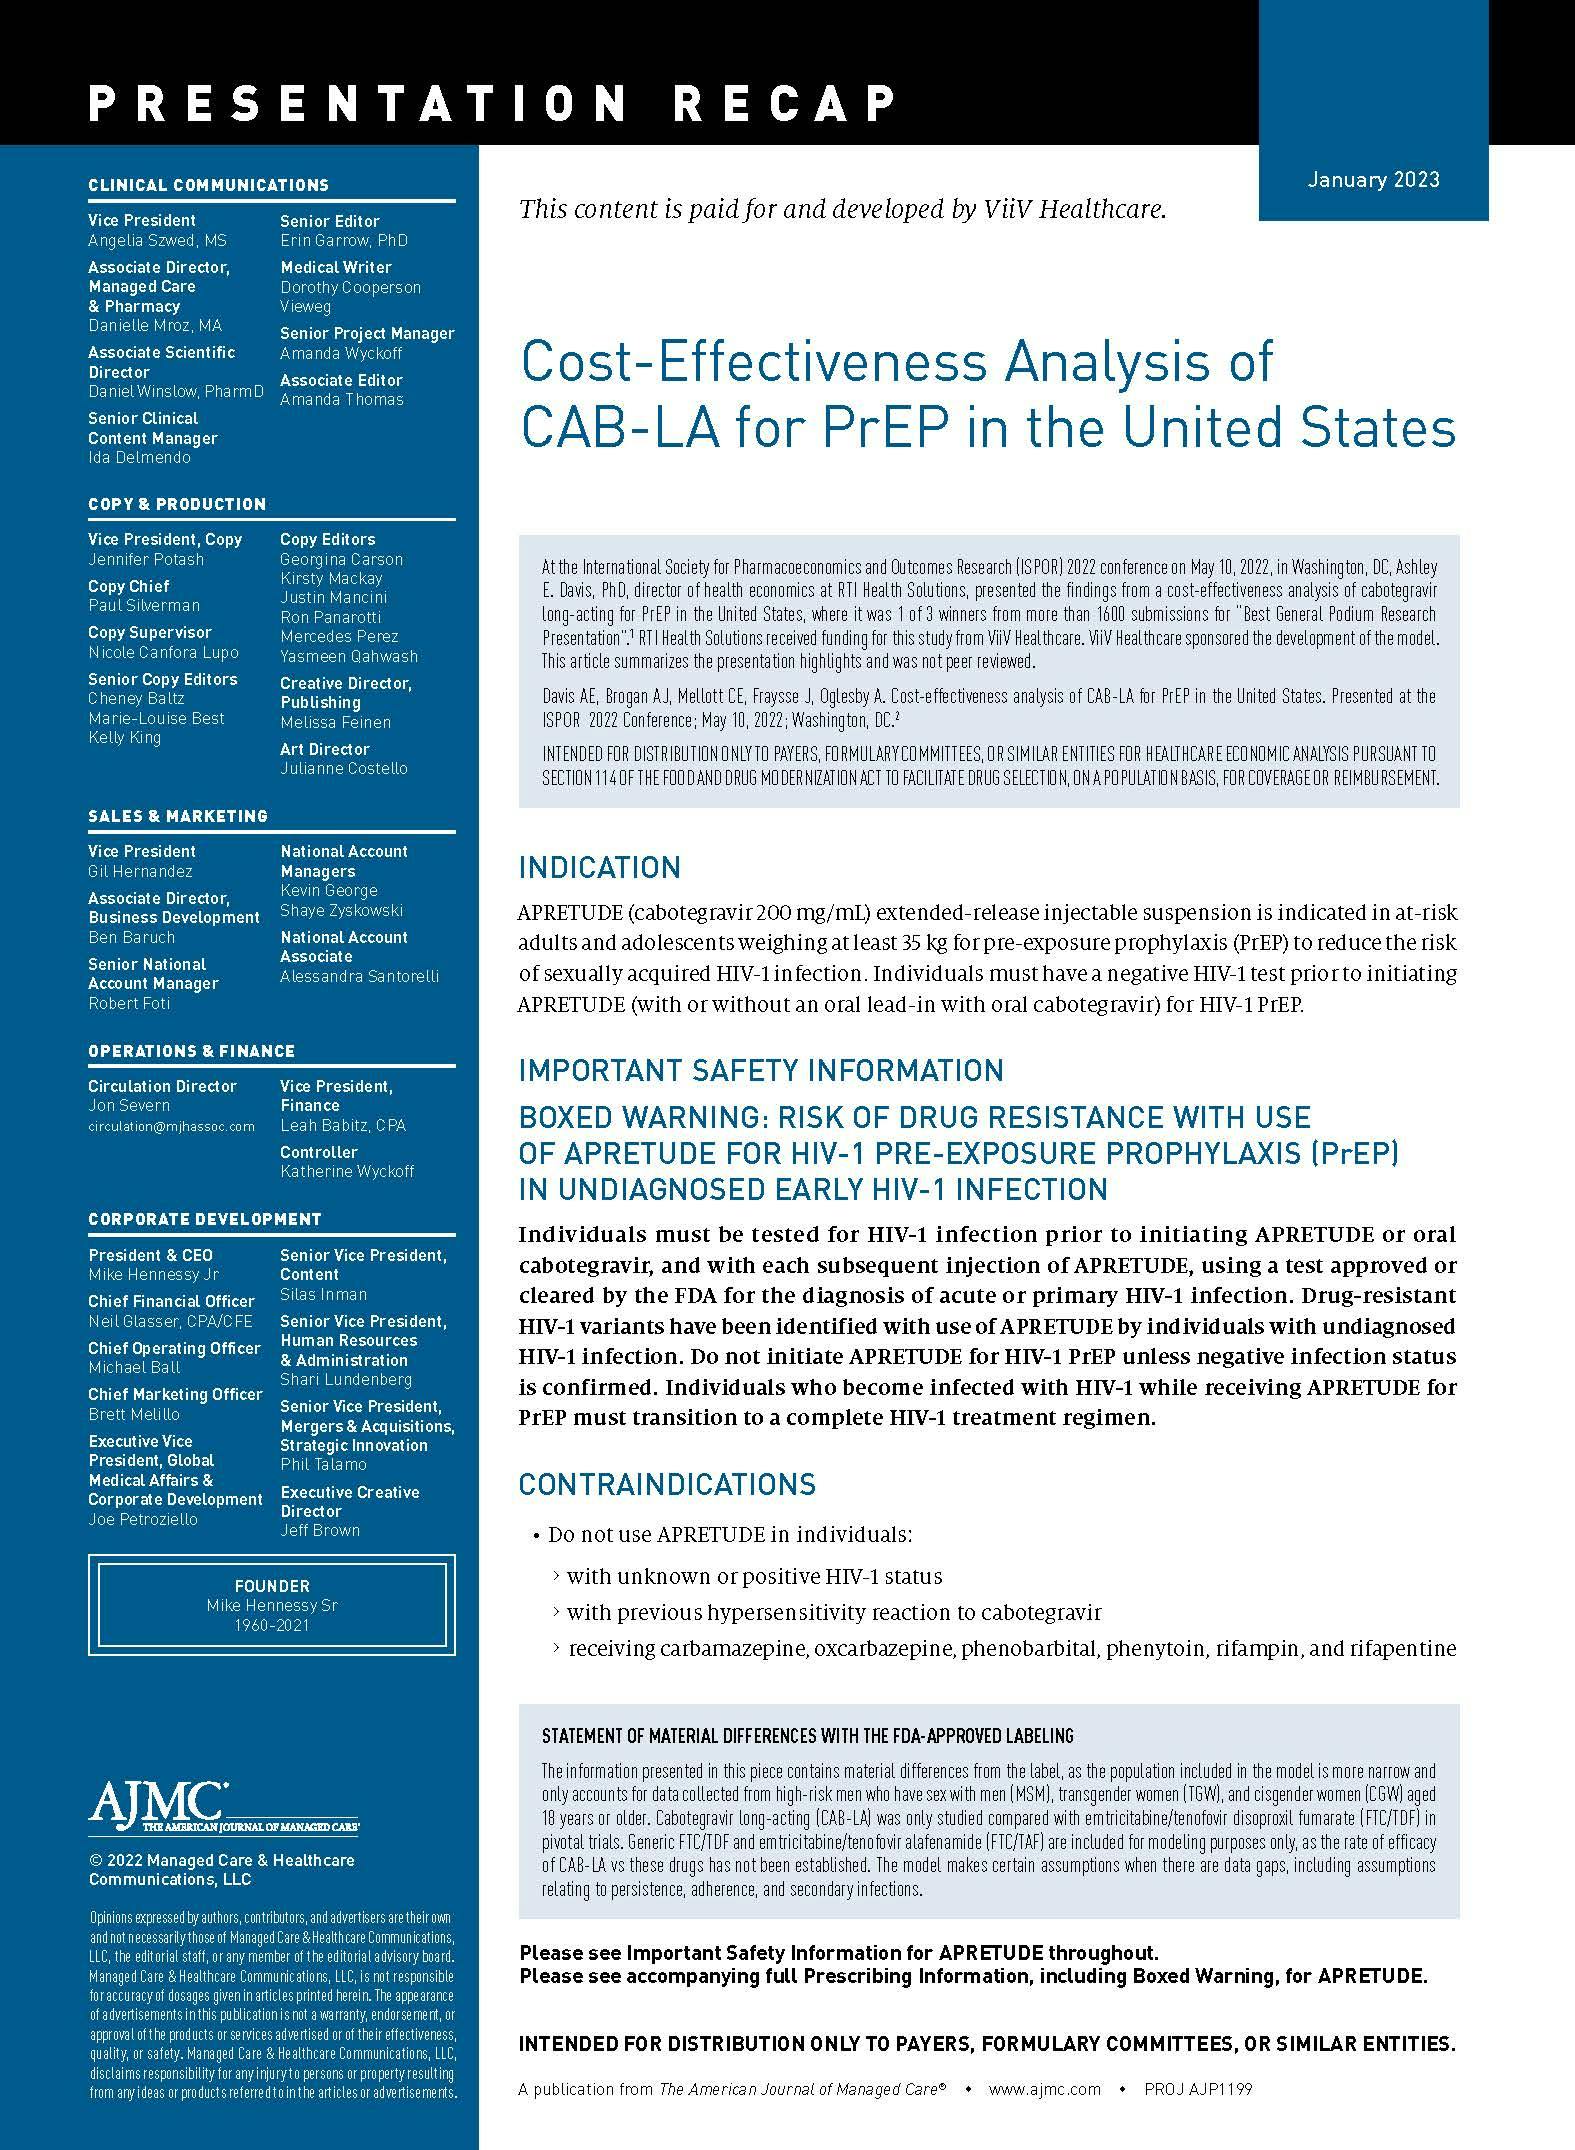 Cost-Effectiveness Analysis of CAB-LA for PrEP in the United States